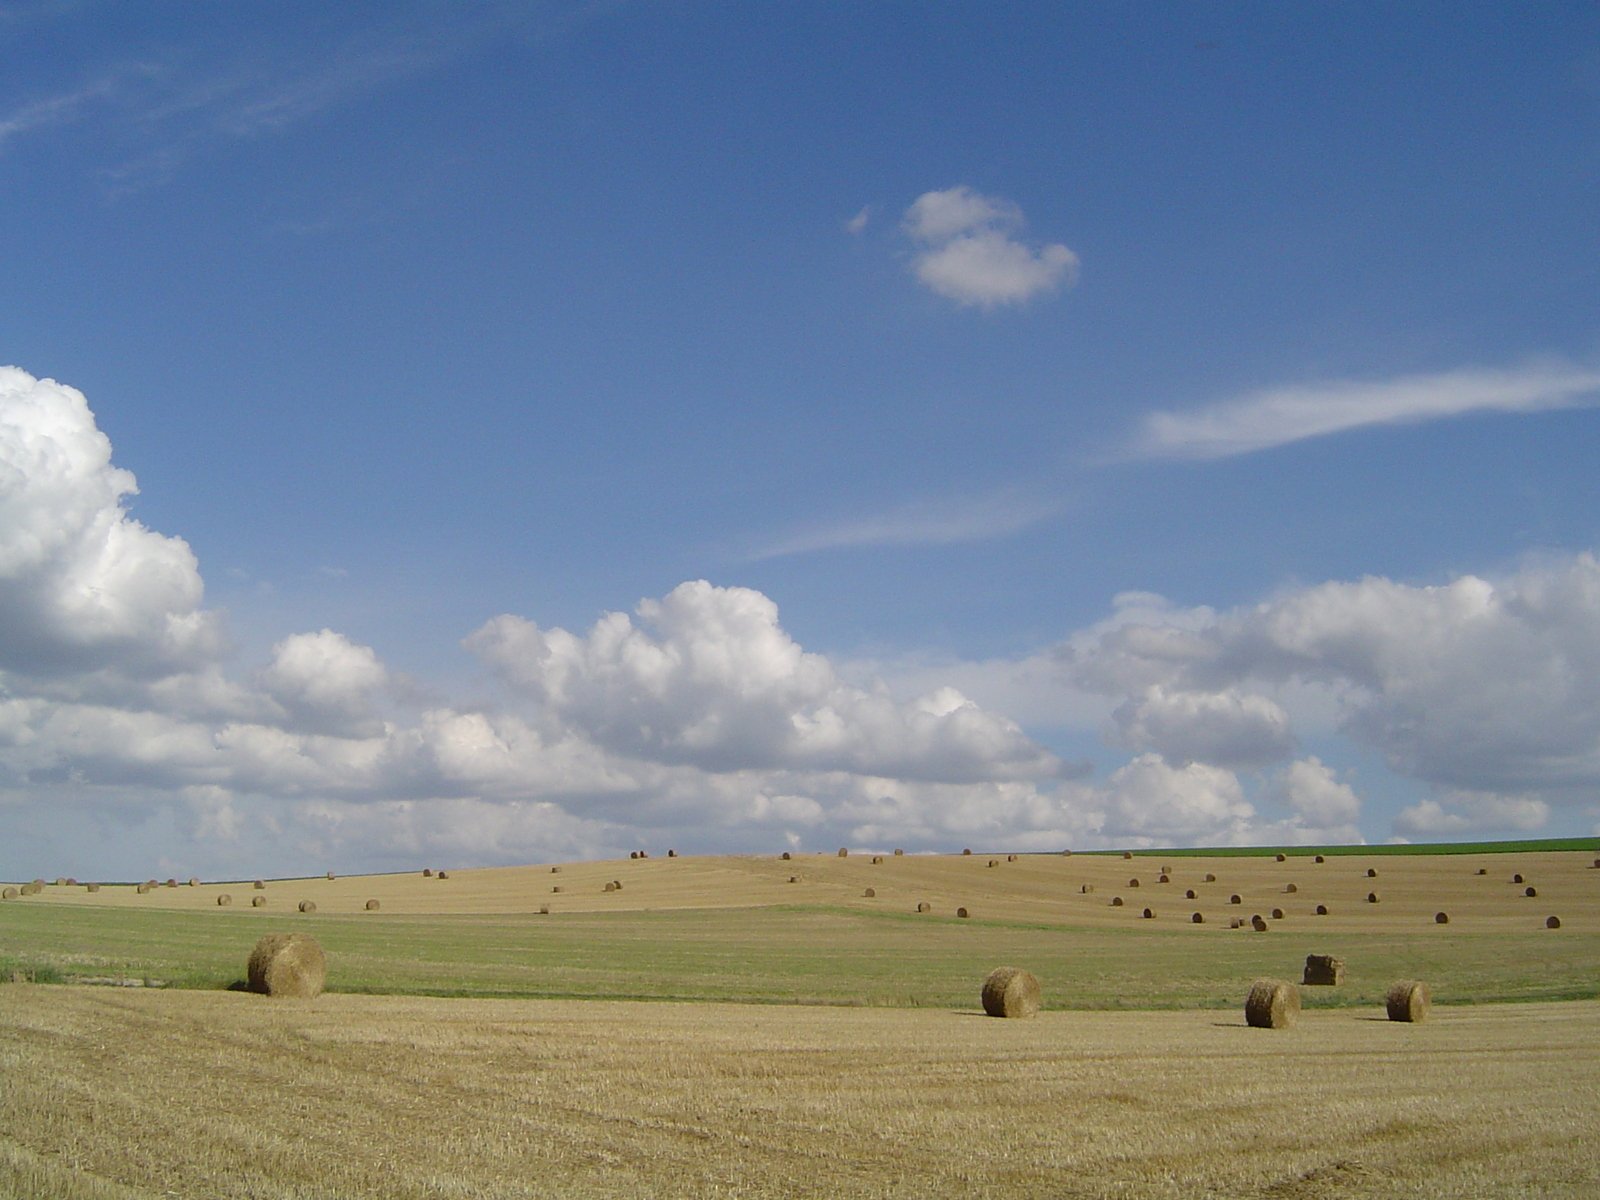 bales of hay are scattered in a large field on a partly cloudy day